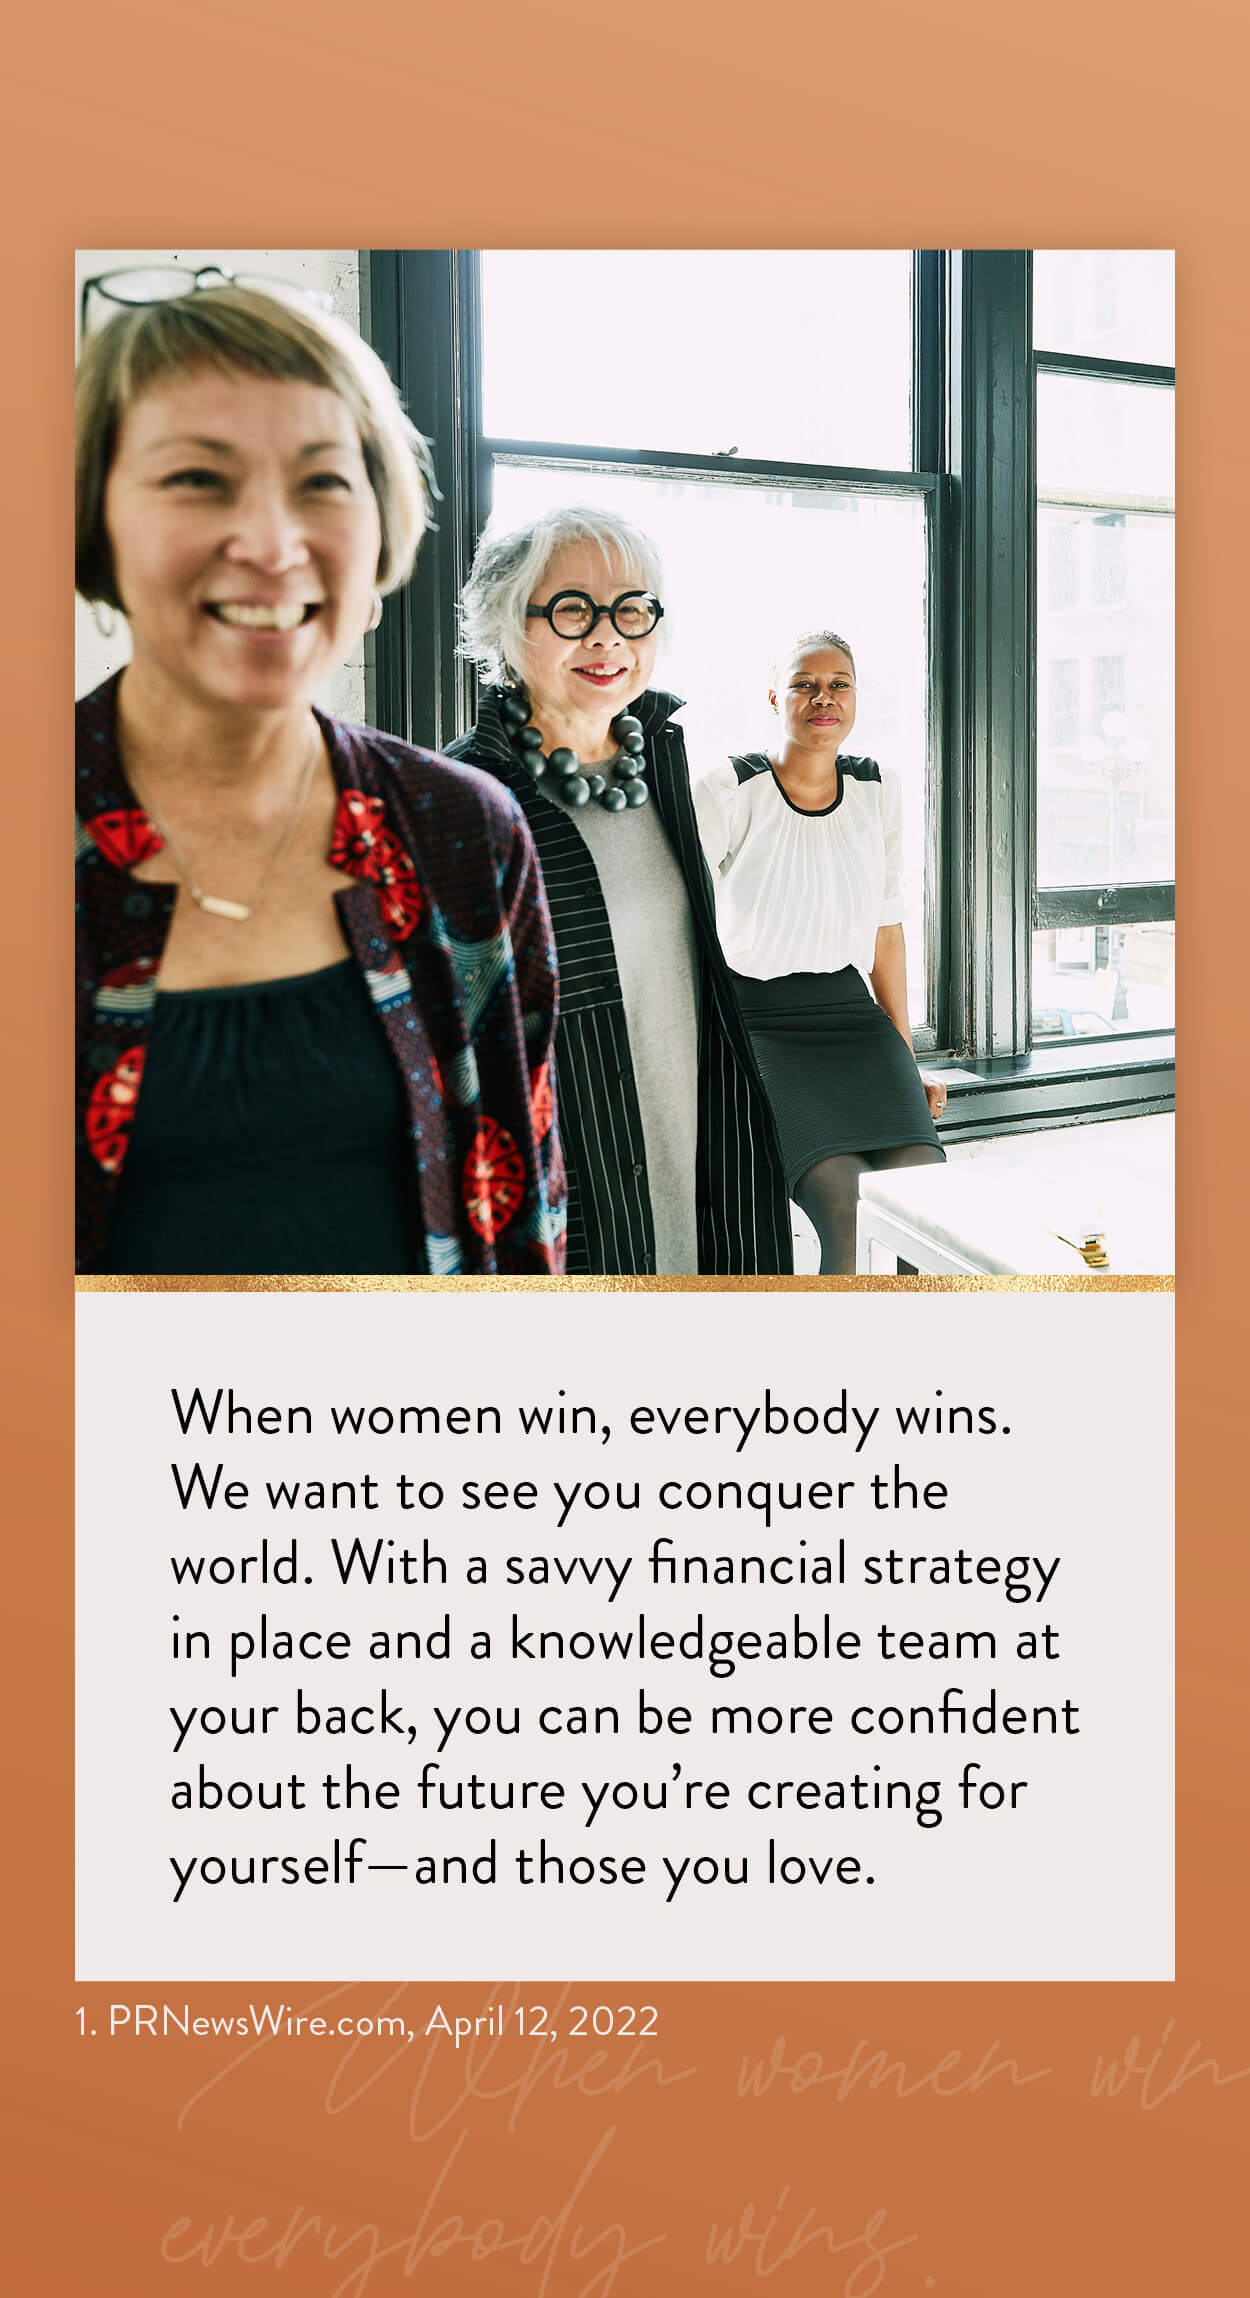 When women win, everybody wins. We want to see you conquer the world. With a savvy financial strategy in place and a knowledgeable team at your back, you can be more confident about the future you’re creating for yourself–and those you love. 1. PRNewsWire.com, April 12, 2022 https://www.kiplinger.com/personal-finance/601731/flying-solo-5-financial-strategies-every-single-woman-should-know